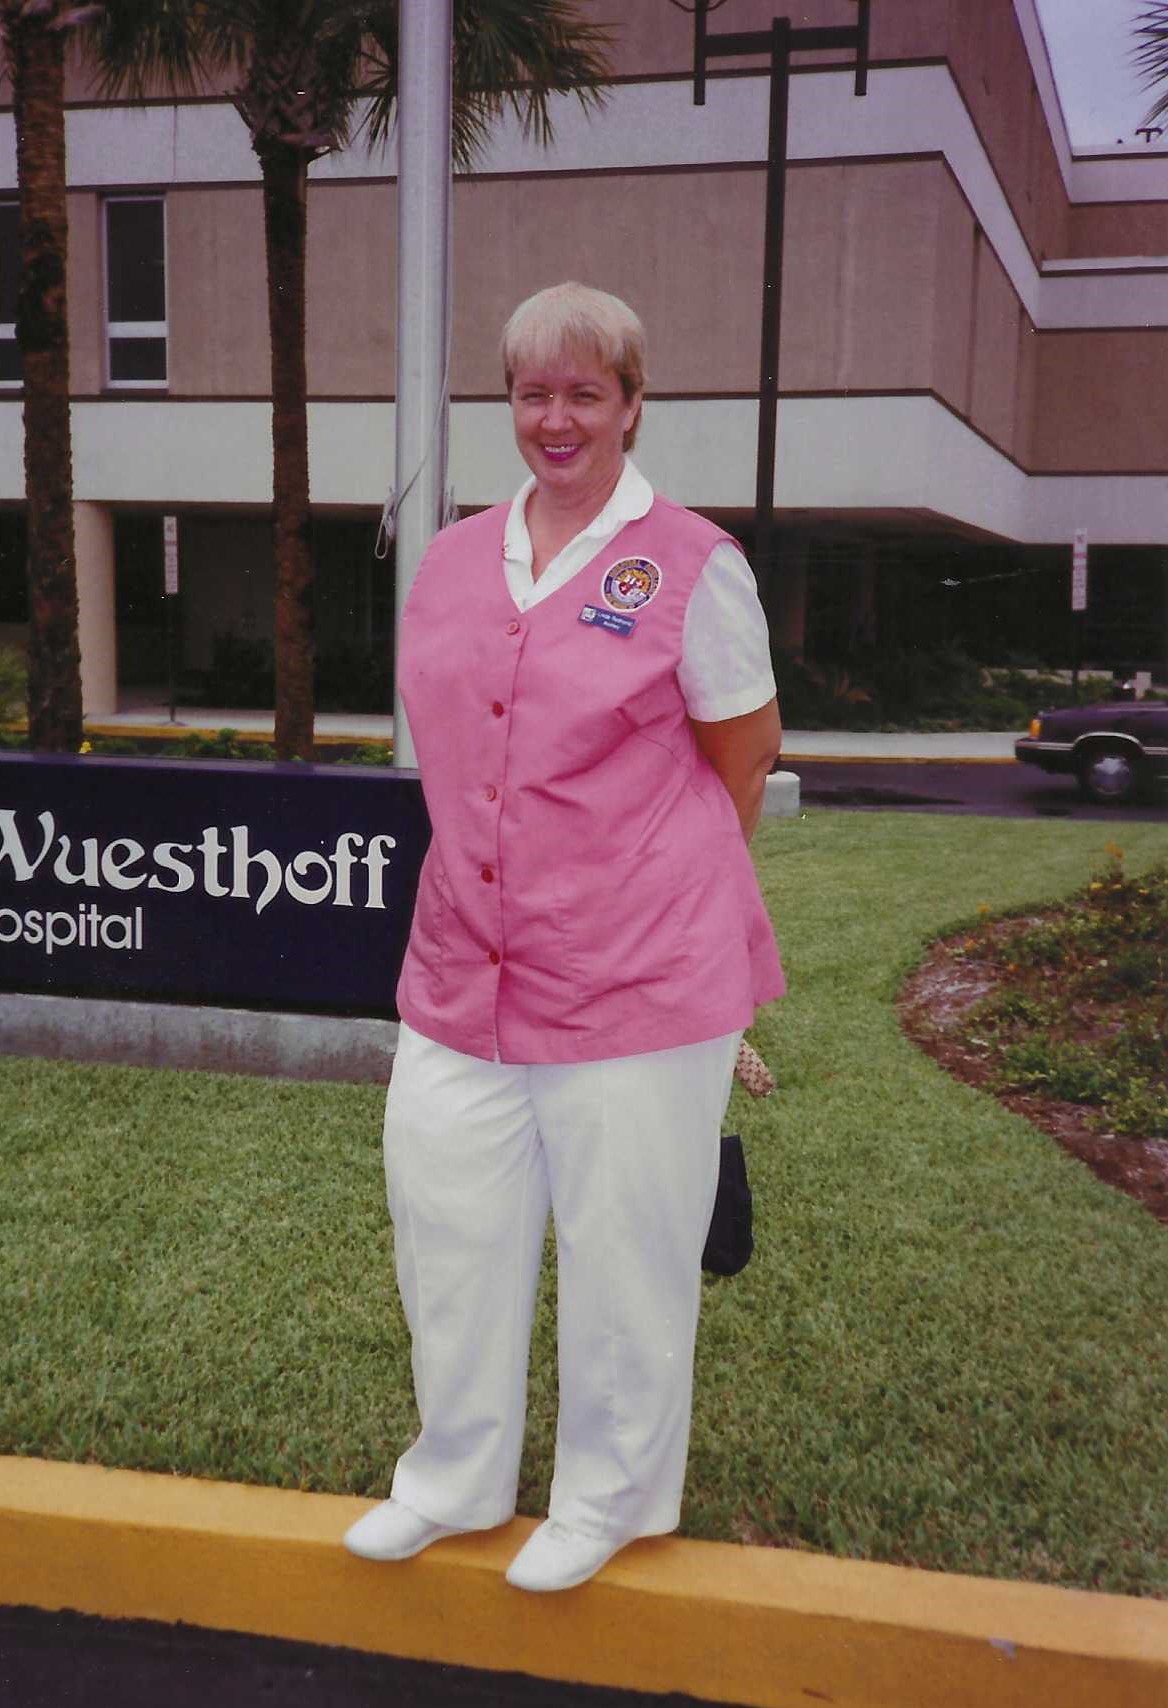 Linda volunteered as a "Pink Lady" at Wuesthoff Hospital in the late 80's/early 90's.